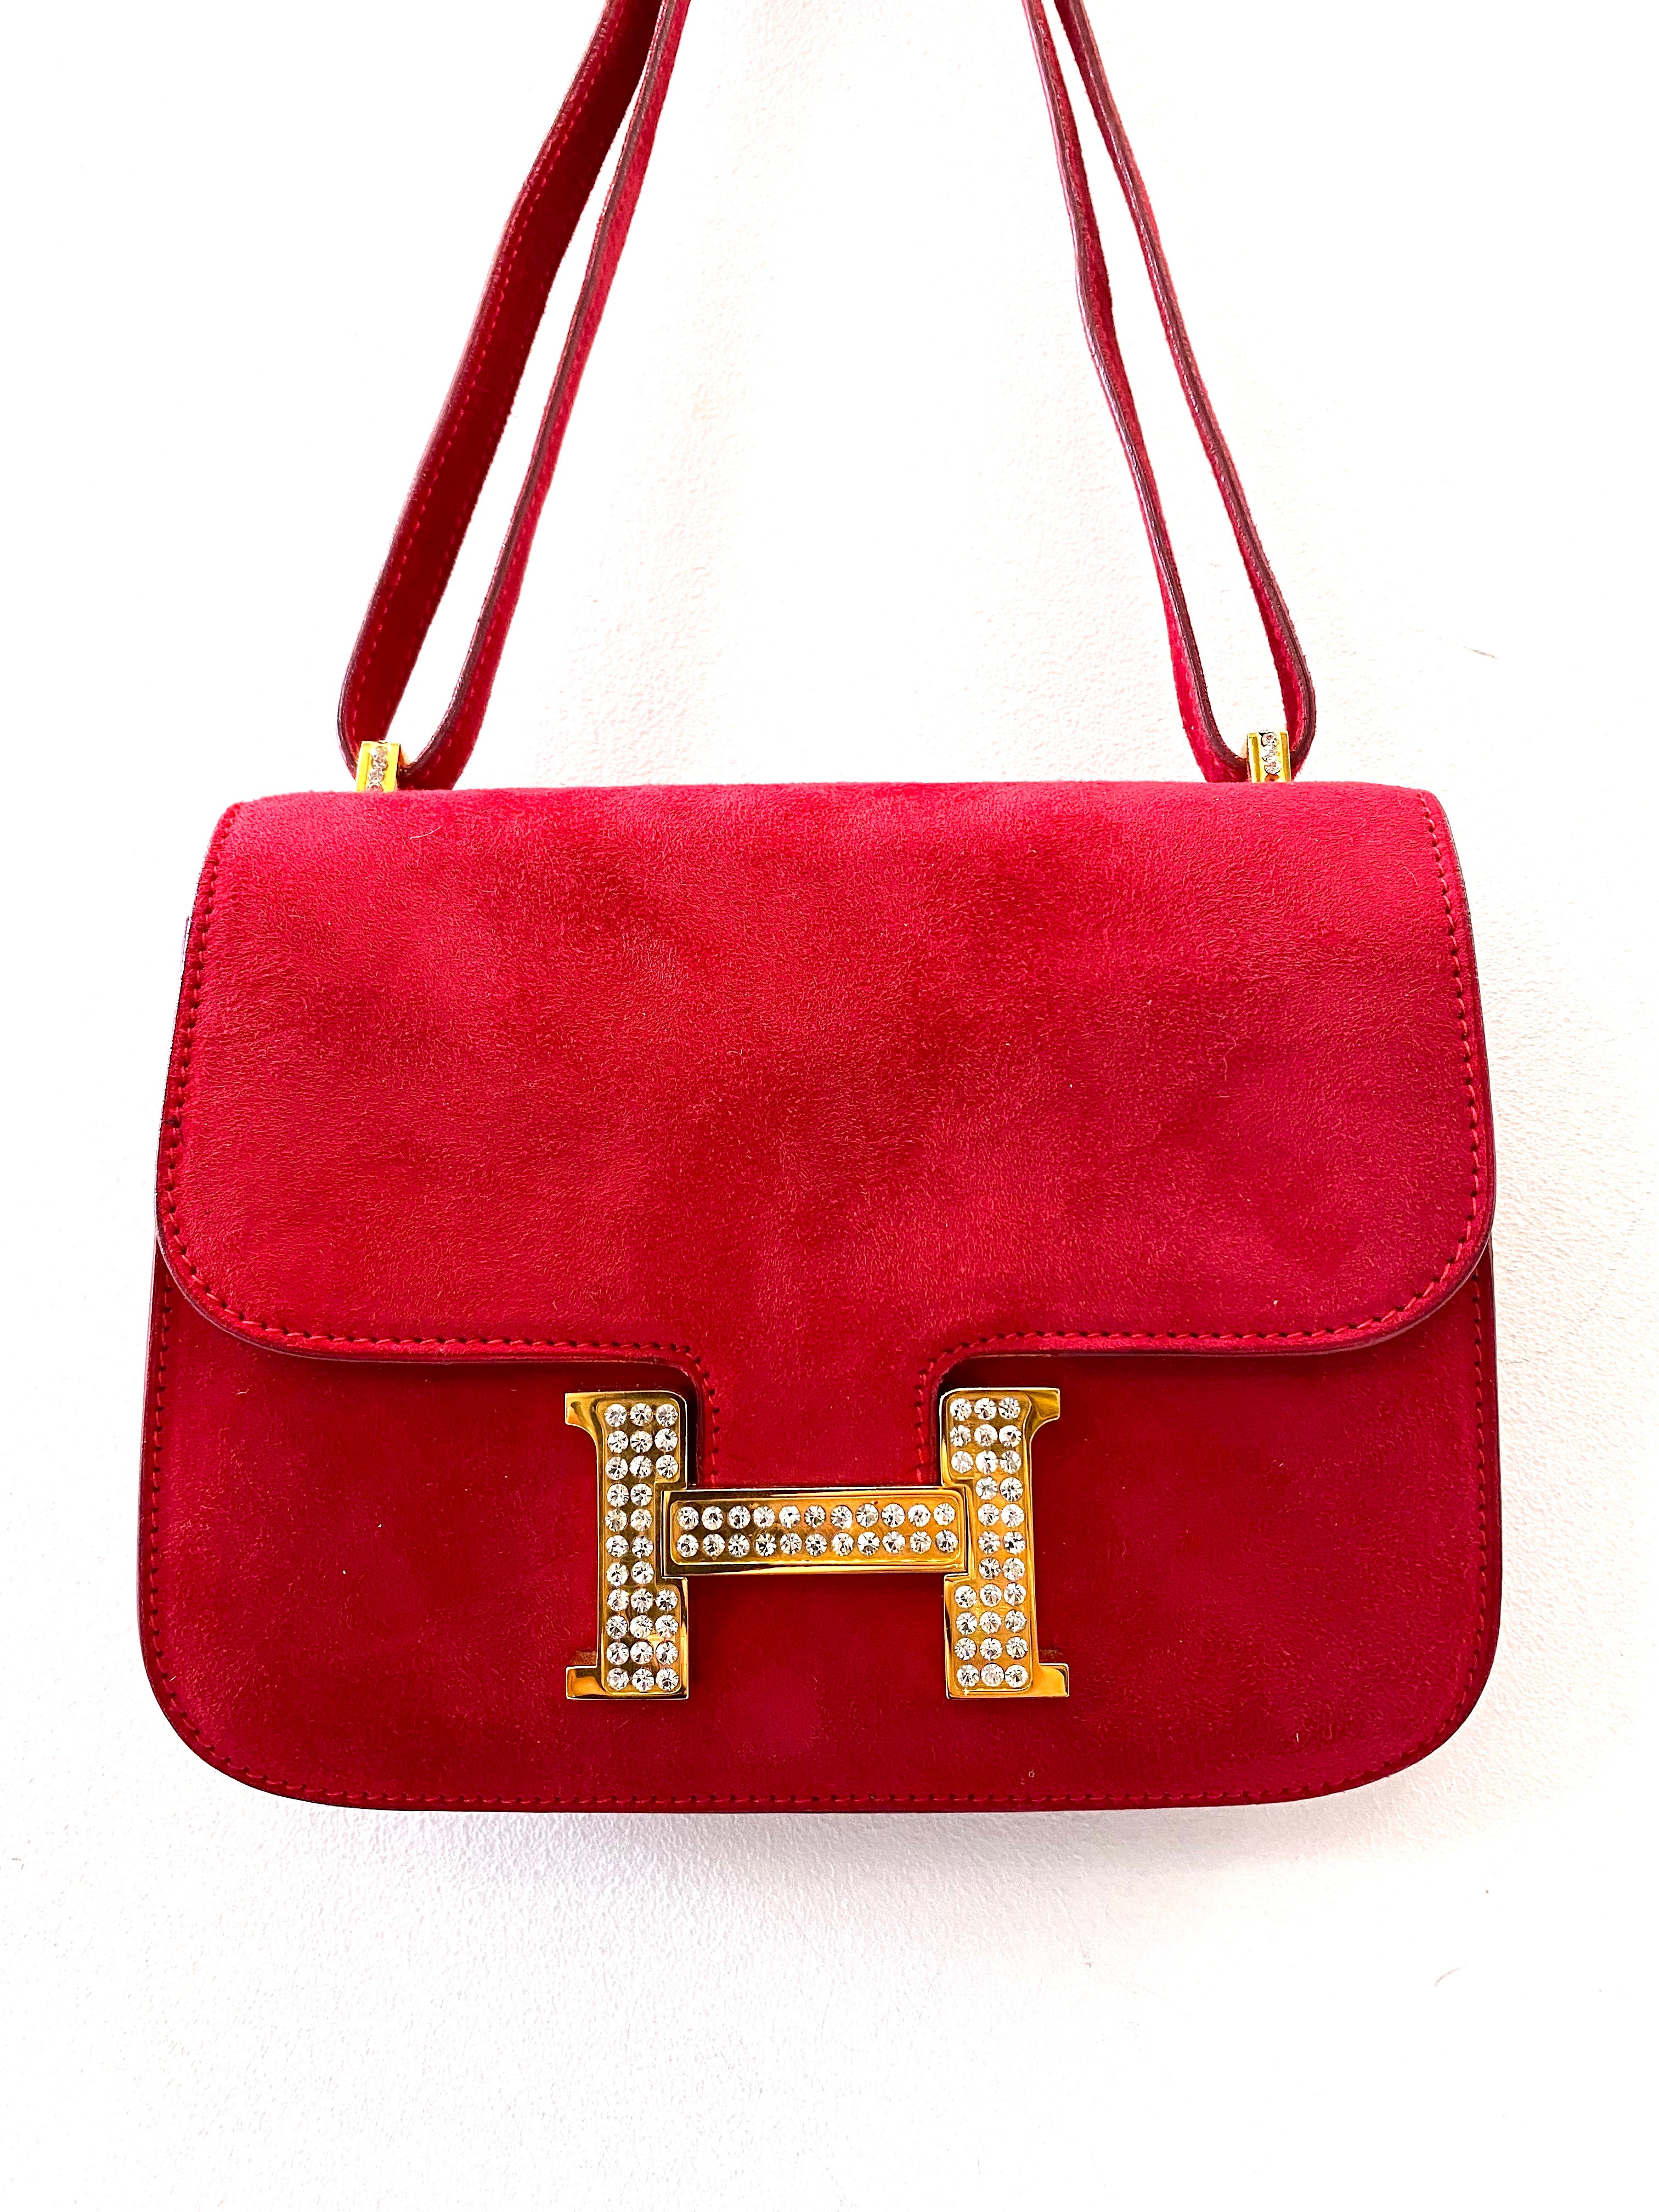 Constance clutch bag in leather HERMÈS  Hermes handbags, Bags, Red leather  handbags